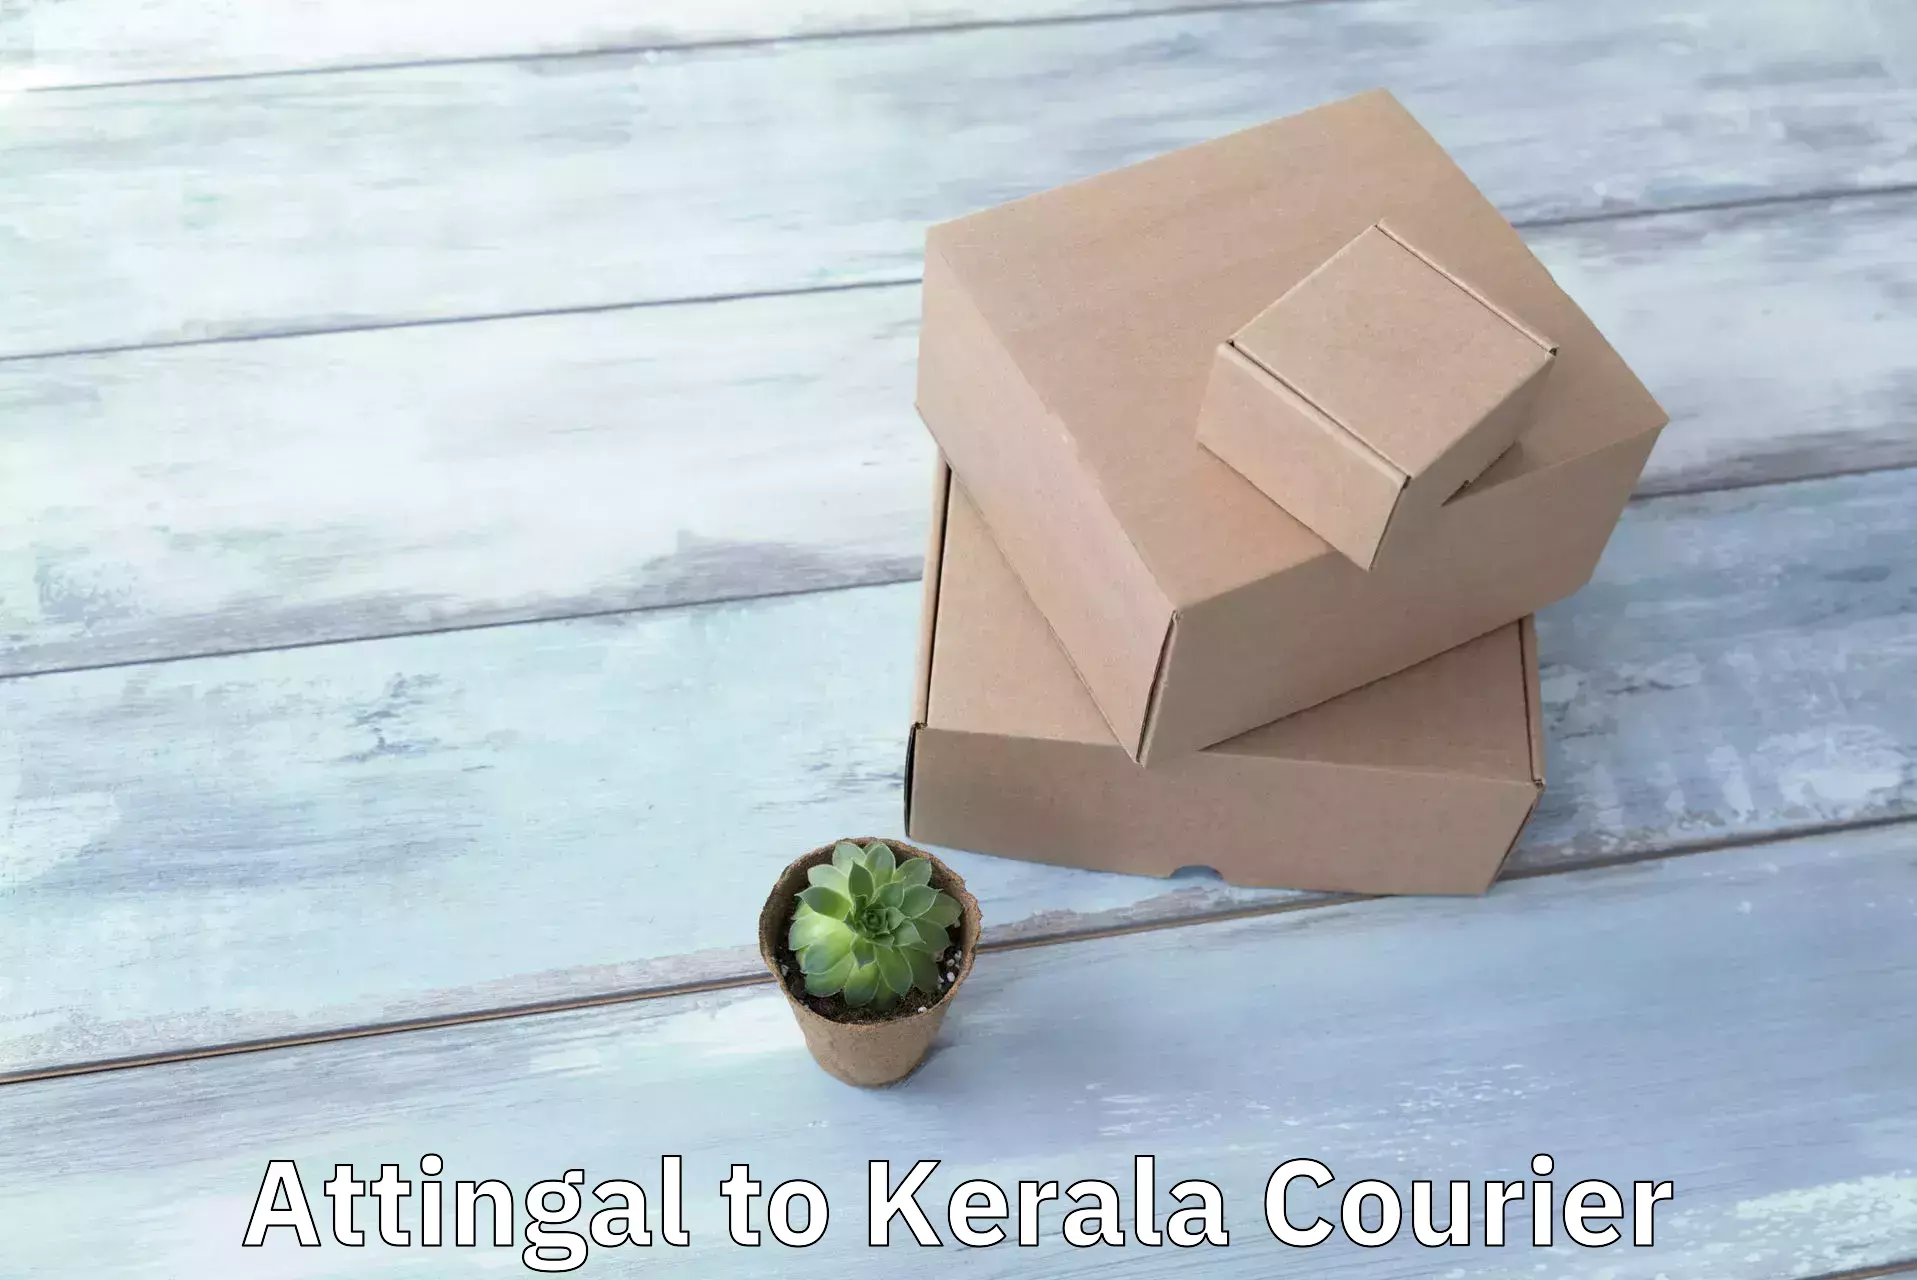 Courier service partnerships Attingal to Payyanur